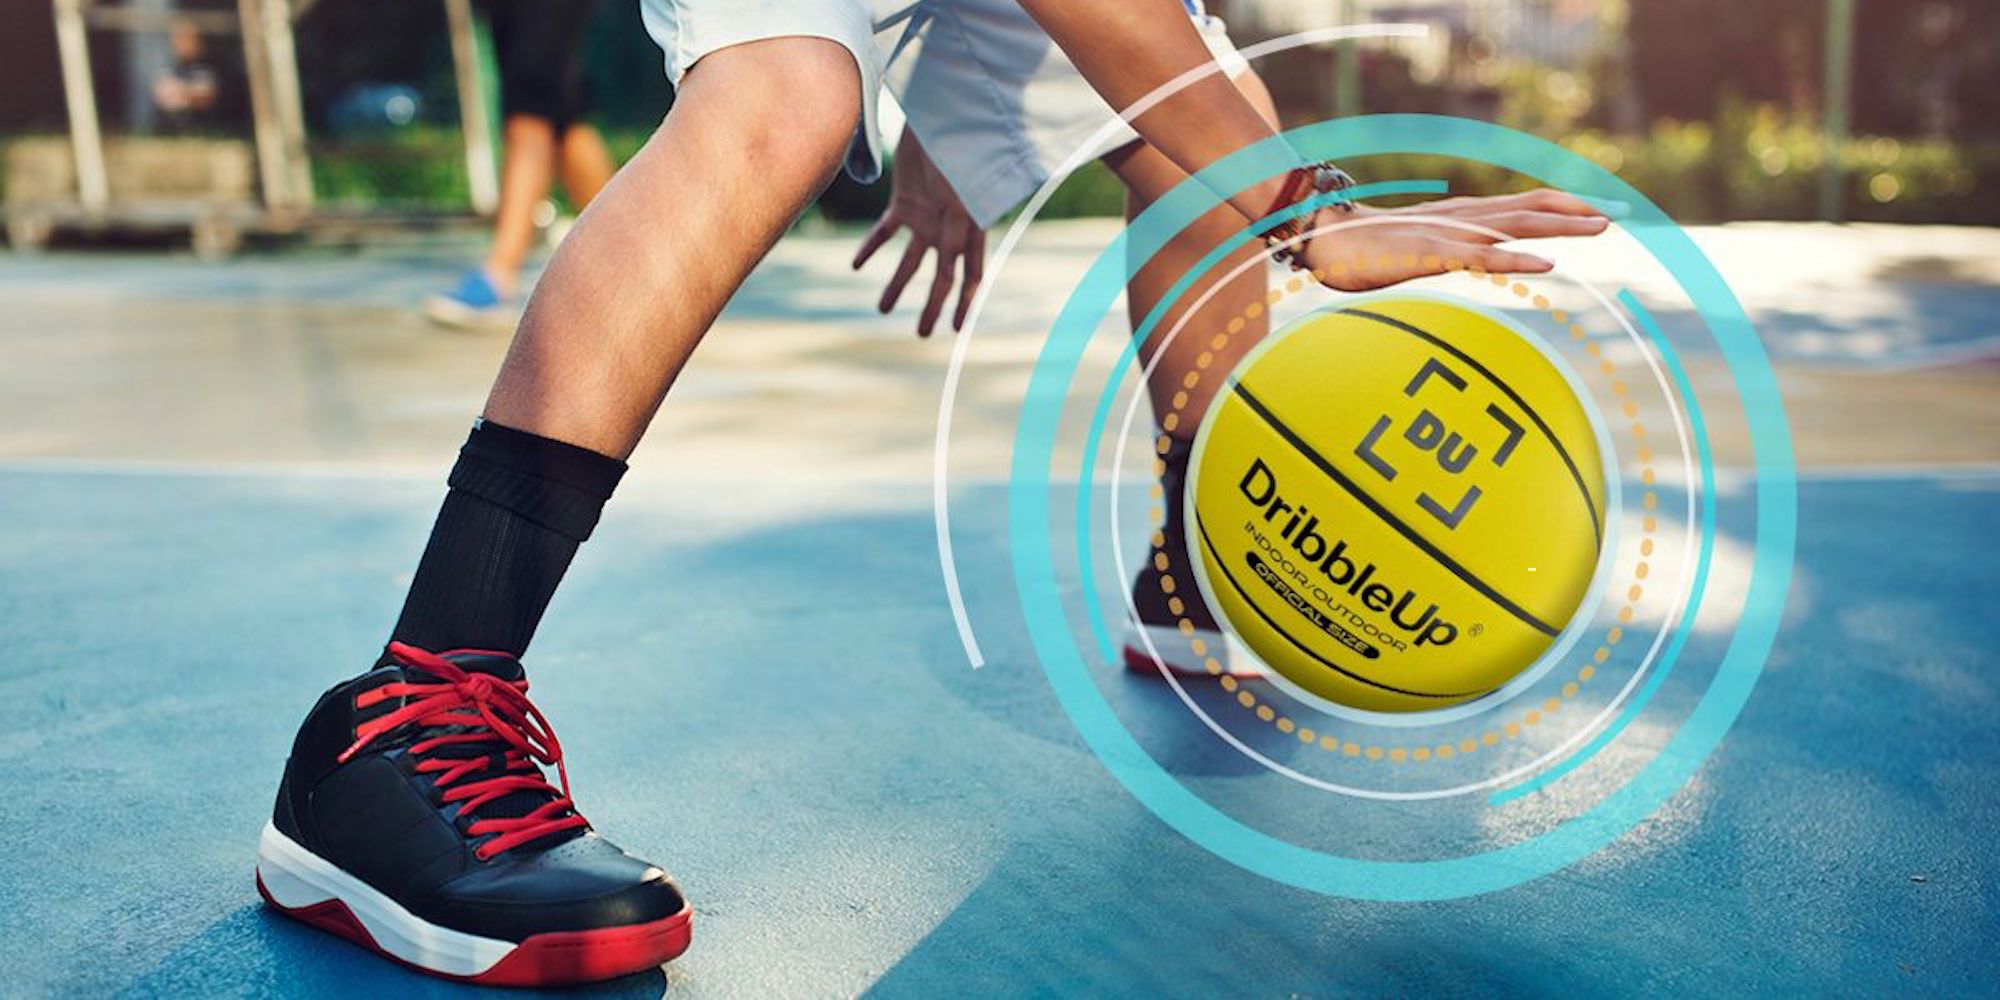 Roll up in a ball. Streetball adidas Ball.